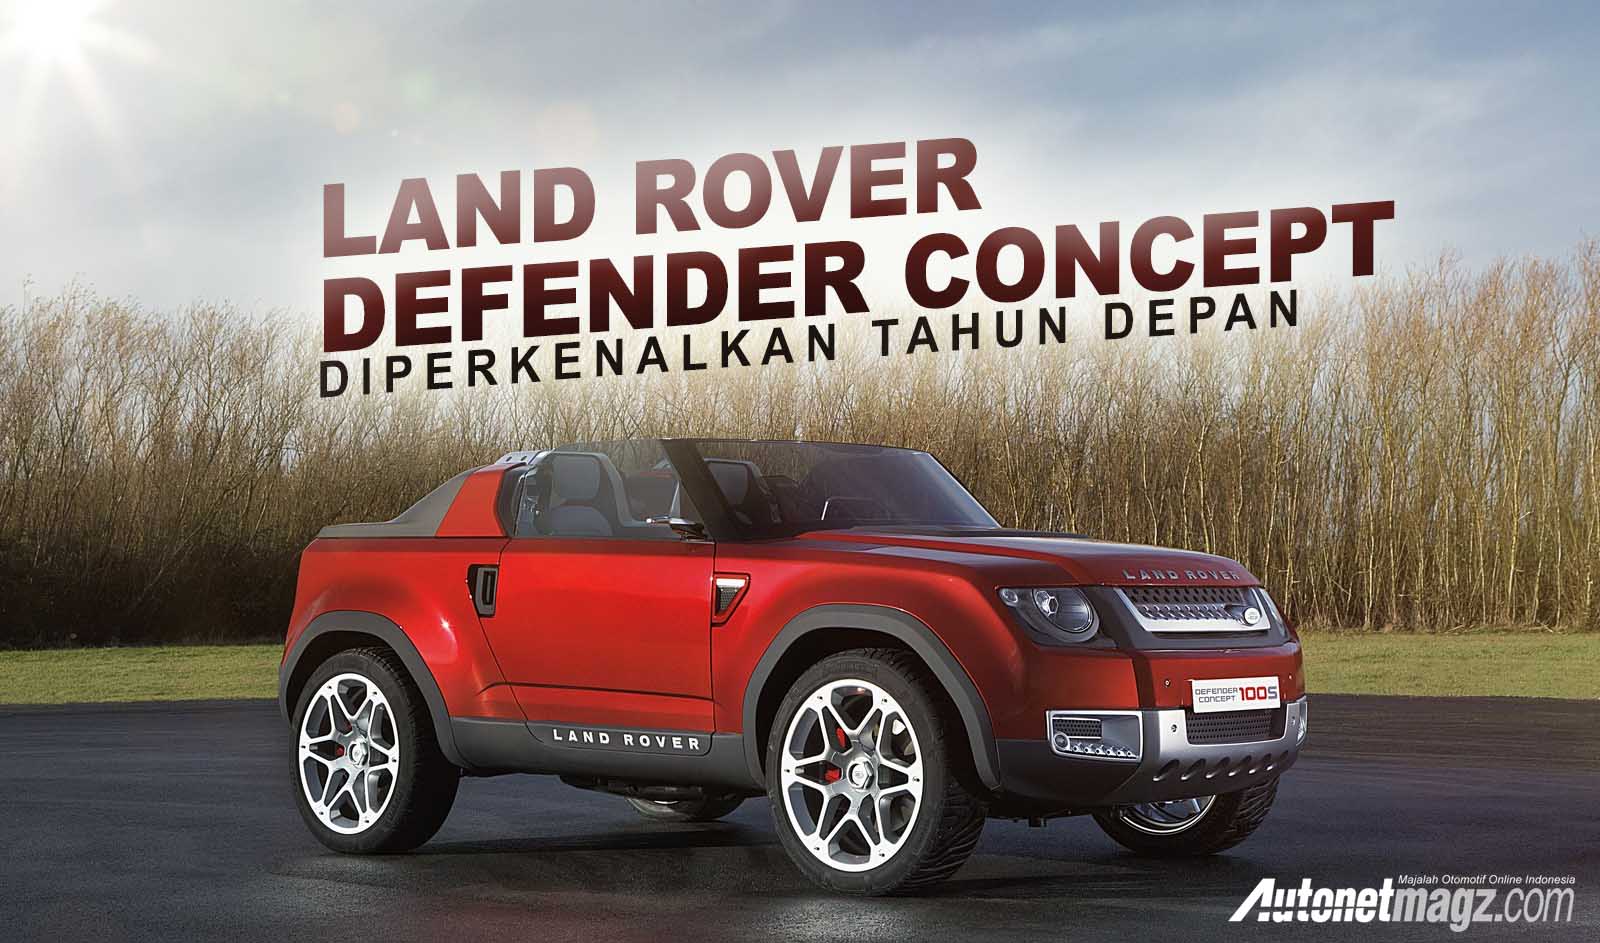 , Land Rover Defender Concept cover: Land Rover Defender Concept cover